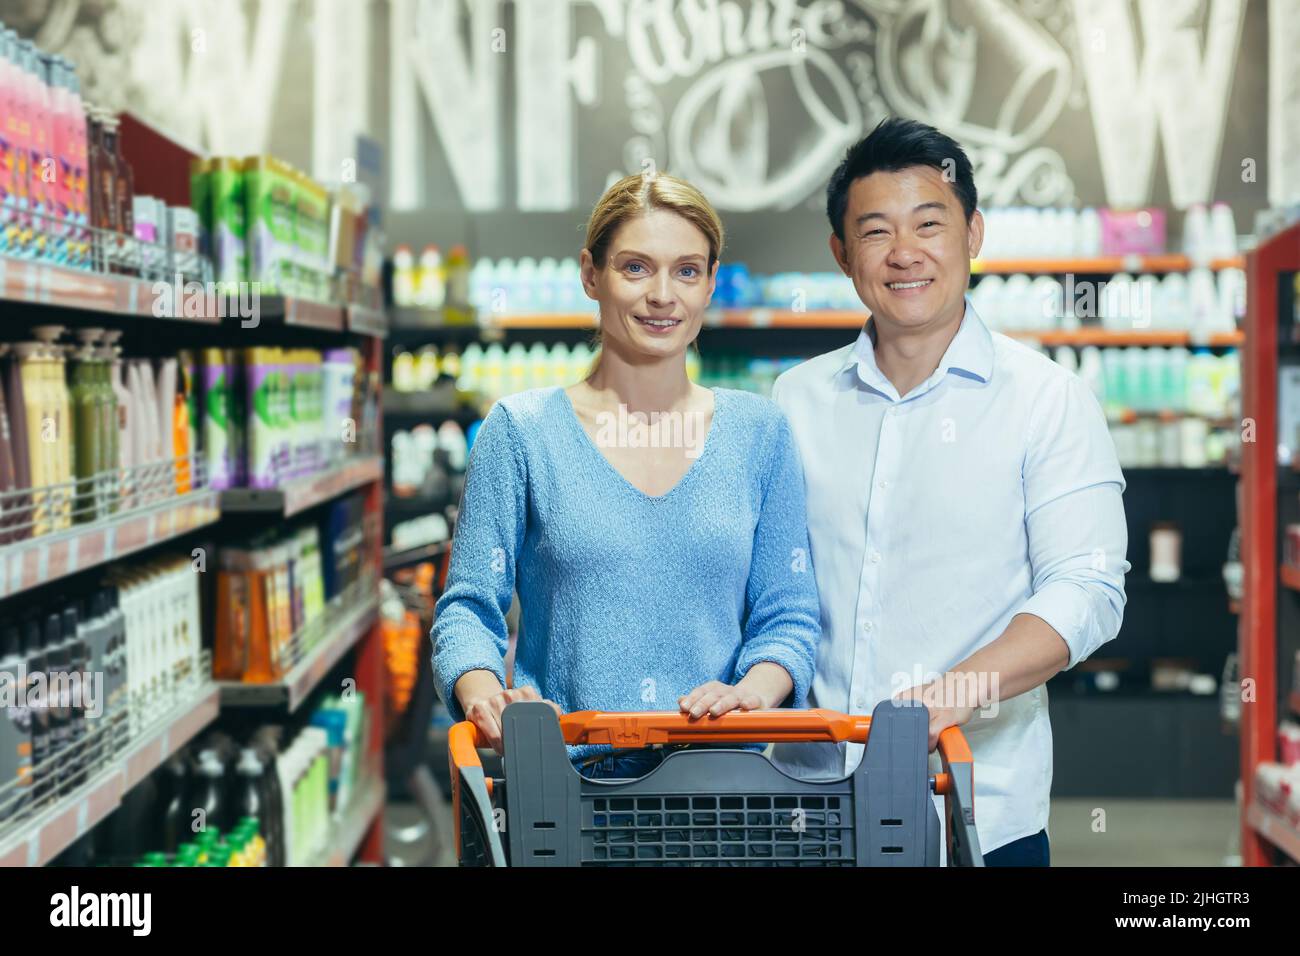 Portrait of happy shoppers in supermarket, interracial couple Asian man and woman, smiling and looking at camera, among shelves with goods Stock Photo